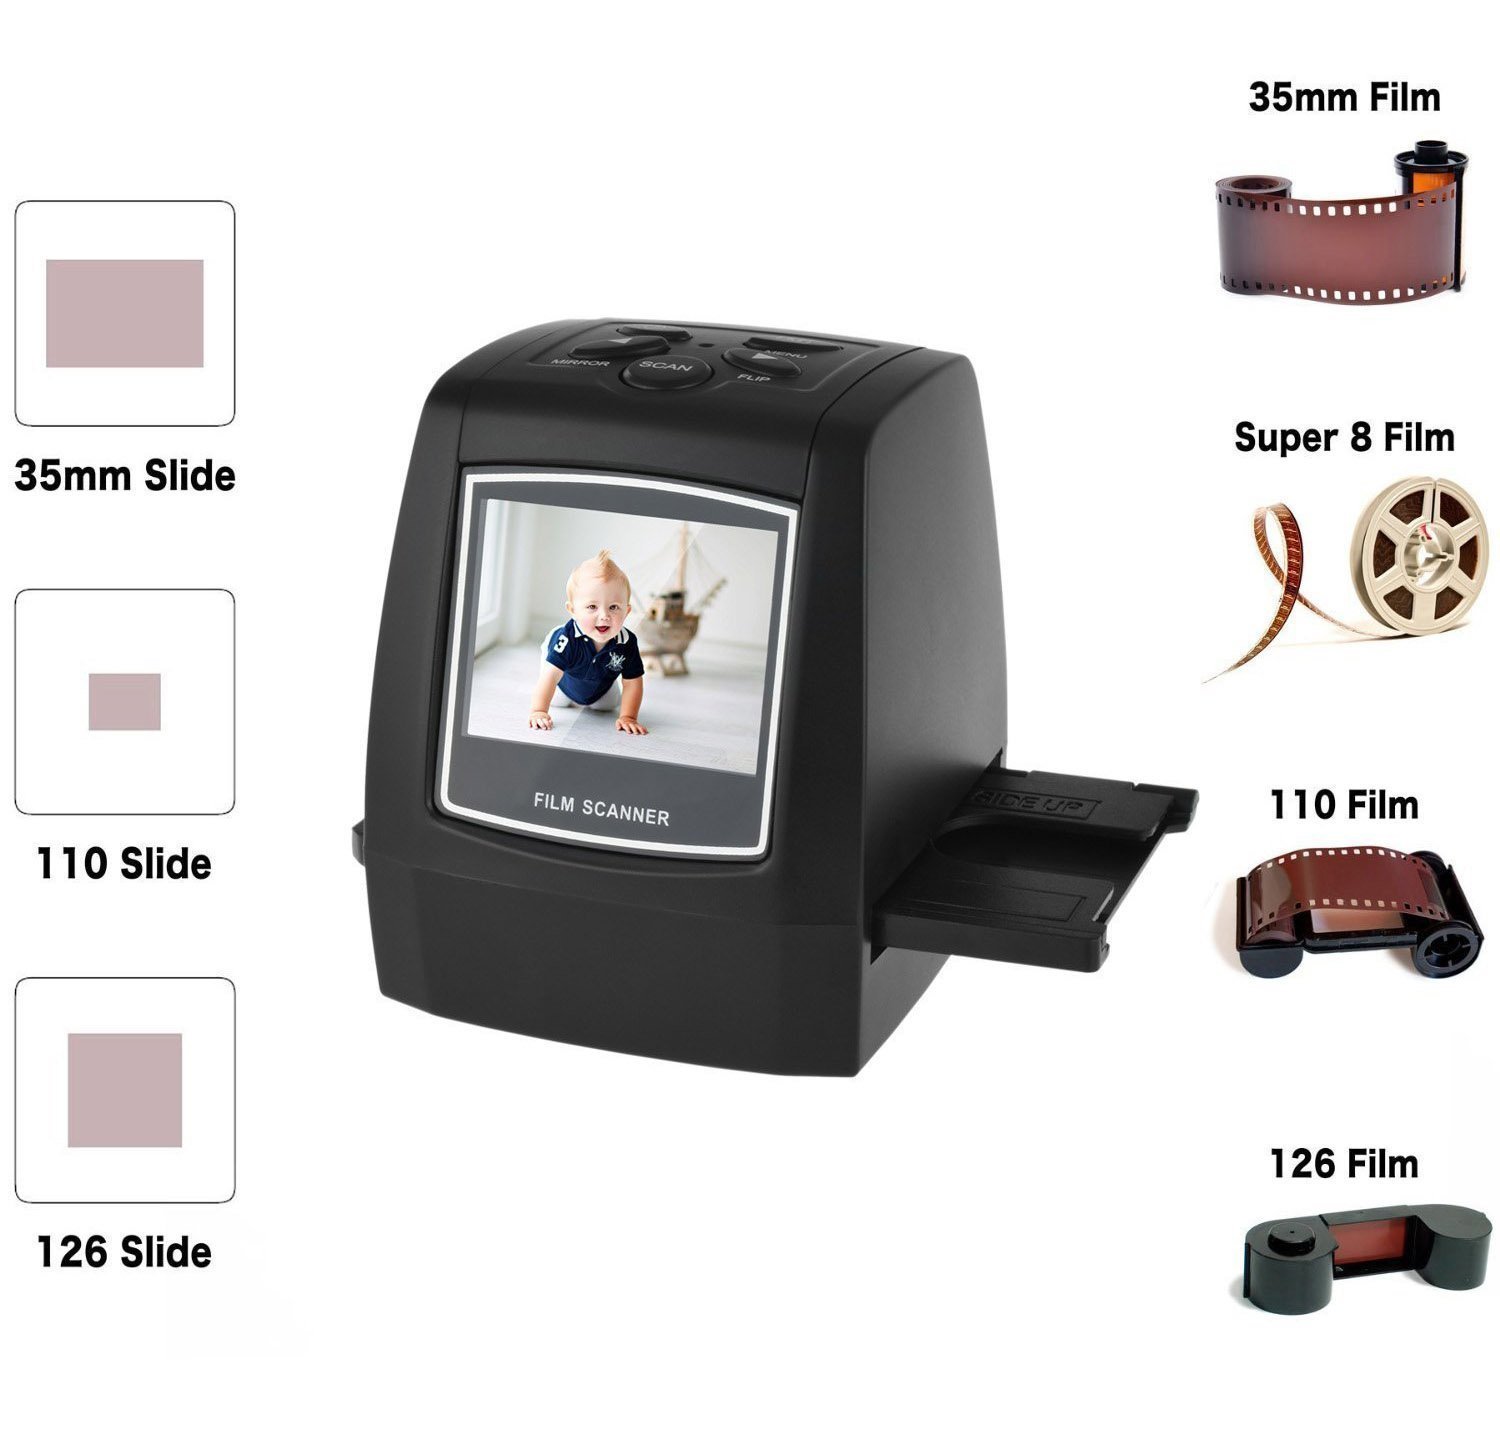 DIGITNOW 22MP All In 1 Slide, Film and Negative Scanner with Speed Load Adapters for 35mm, 110, 126 Slides/Negatives,Super 8 Films